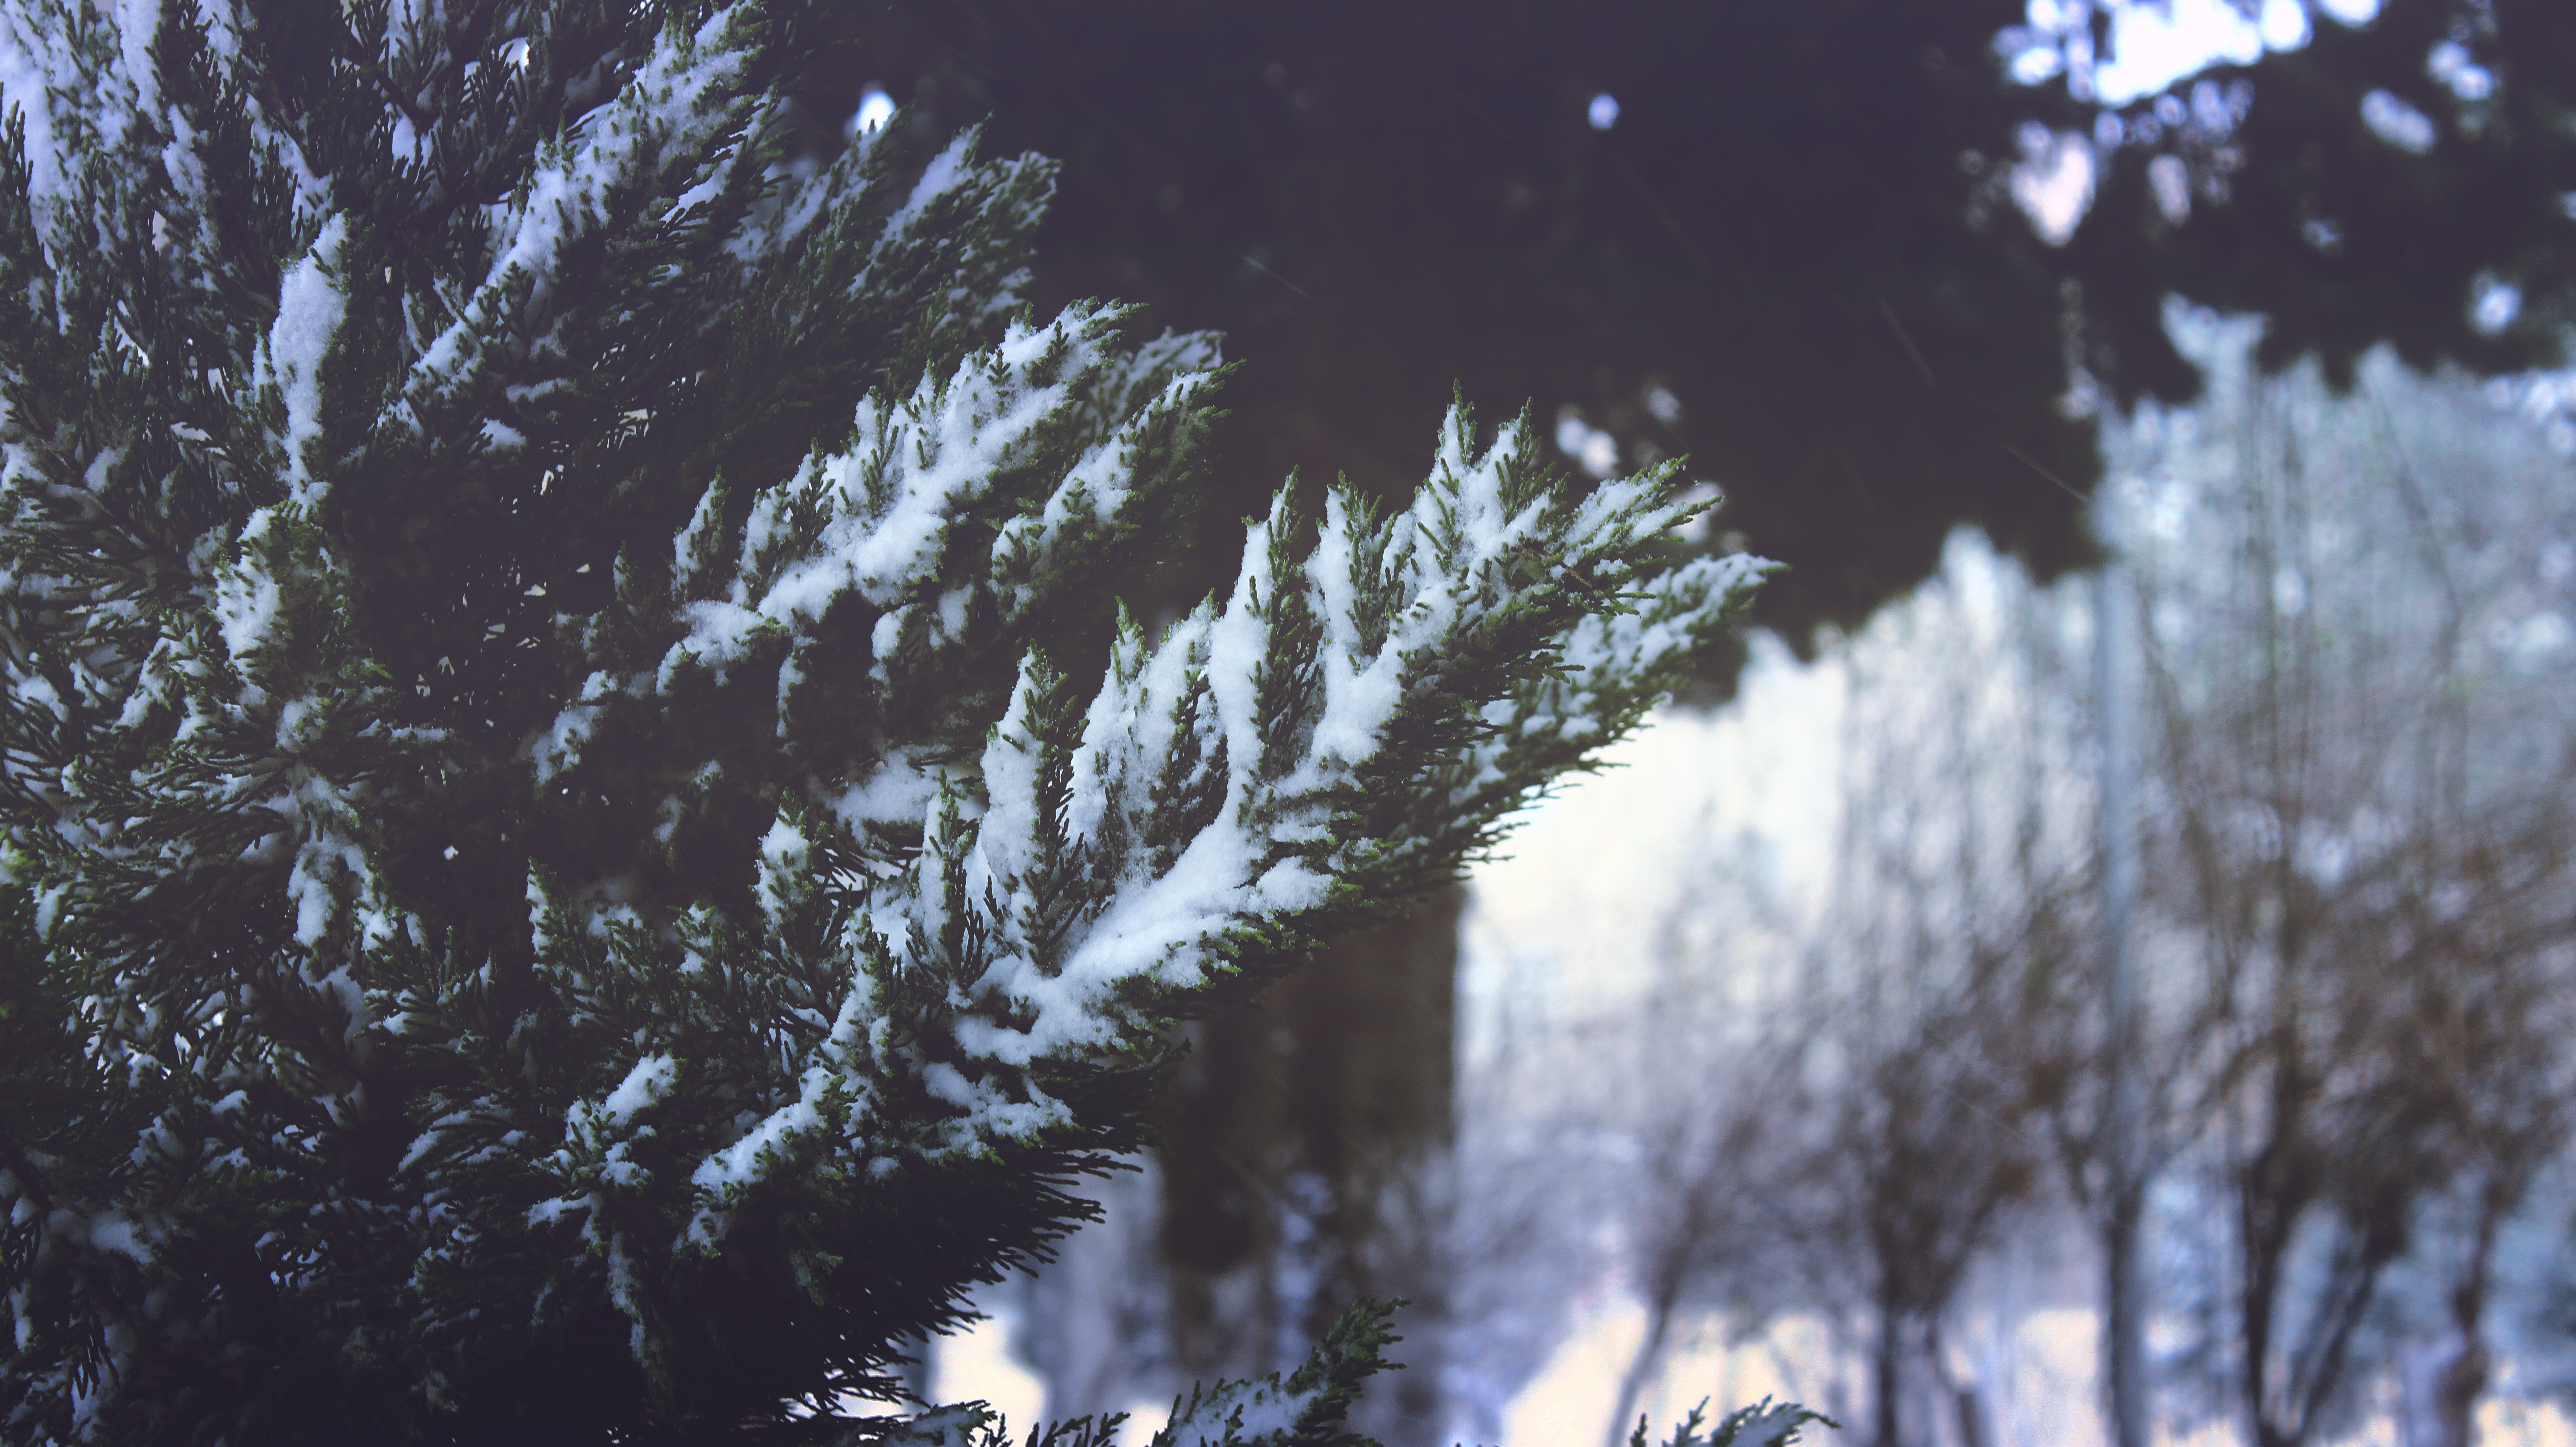 green pine tree with snow